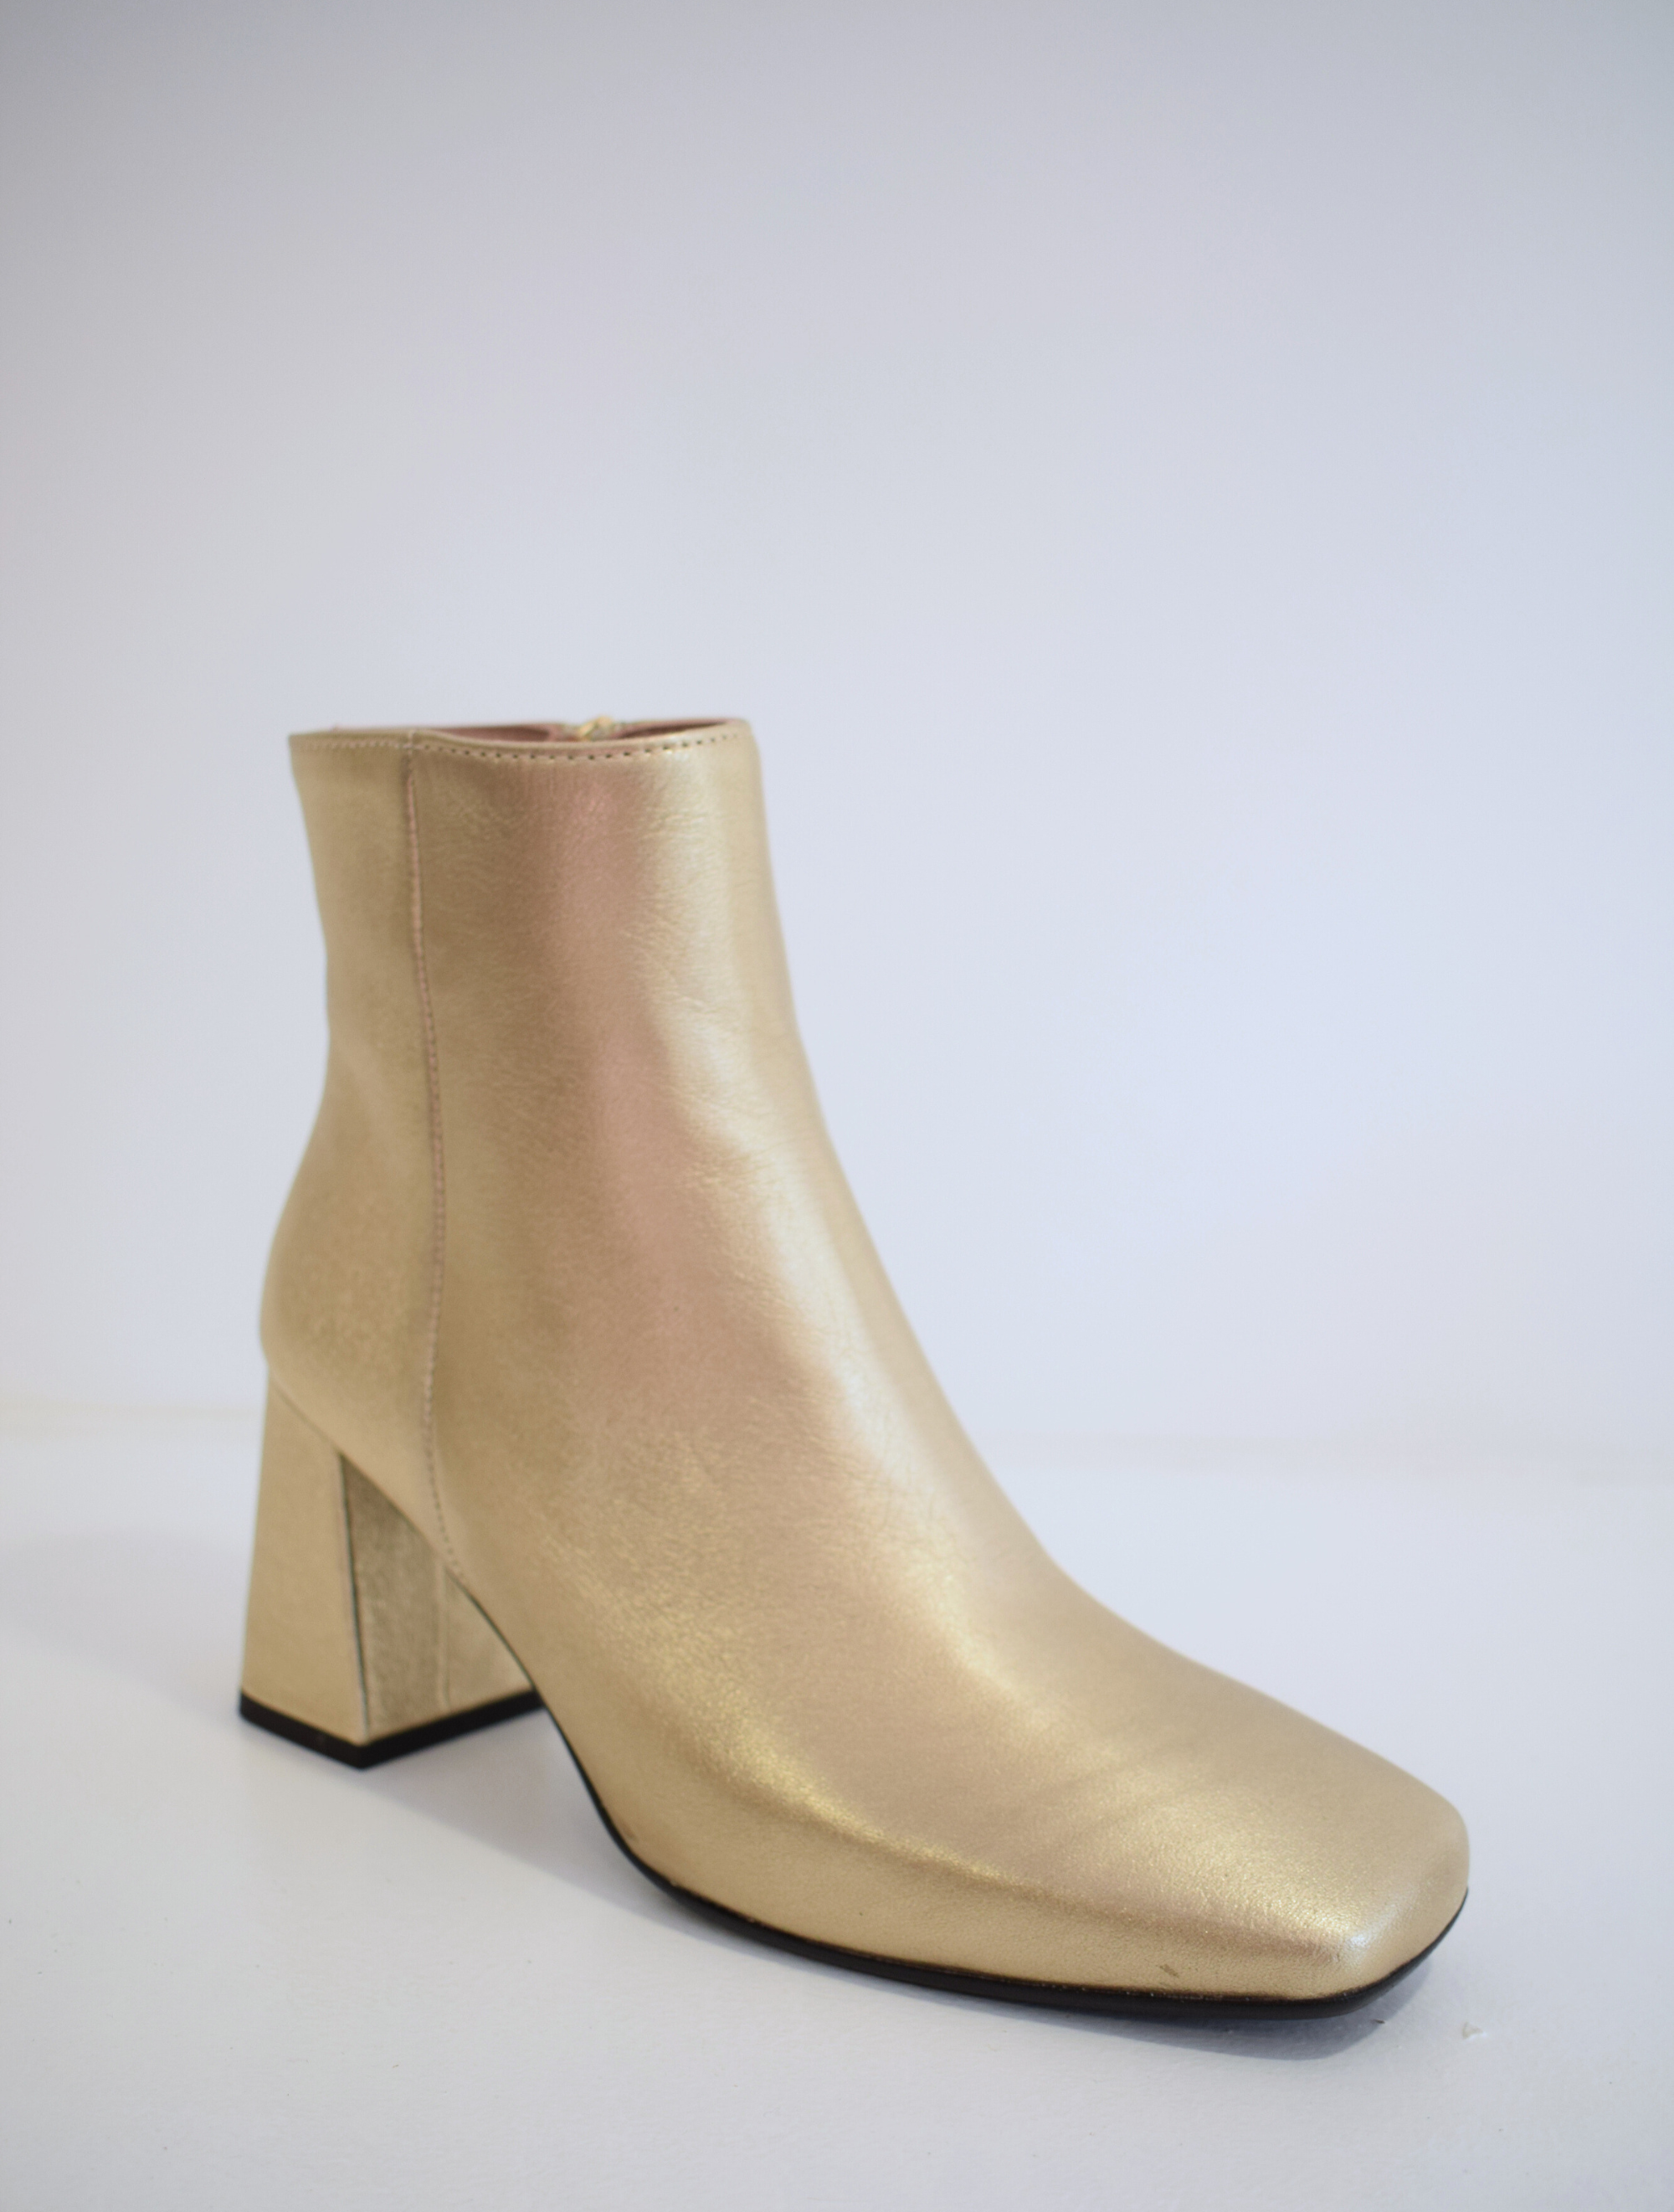 Gold ankle boot with block heel and inside zip fastening